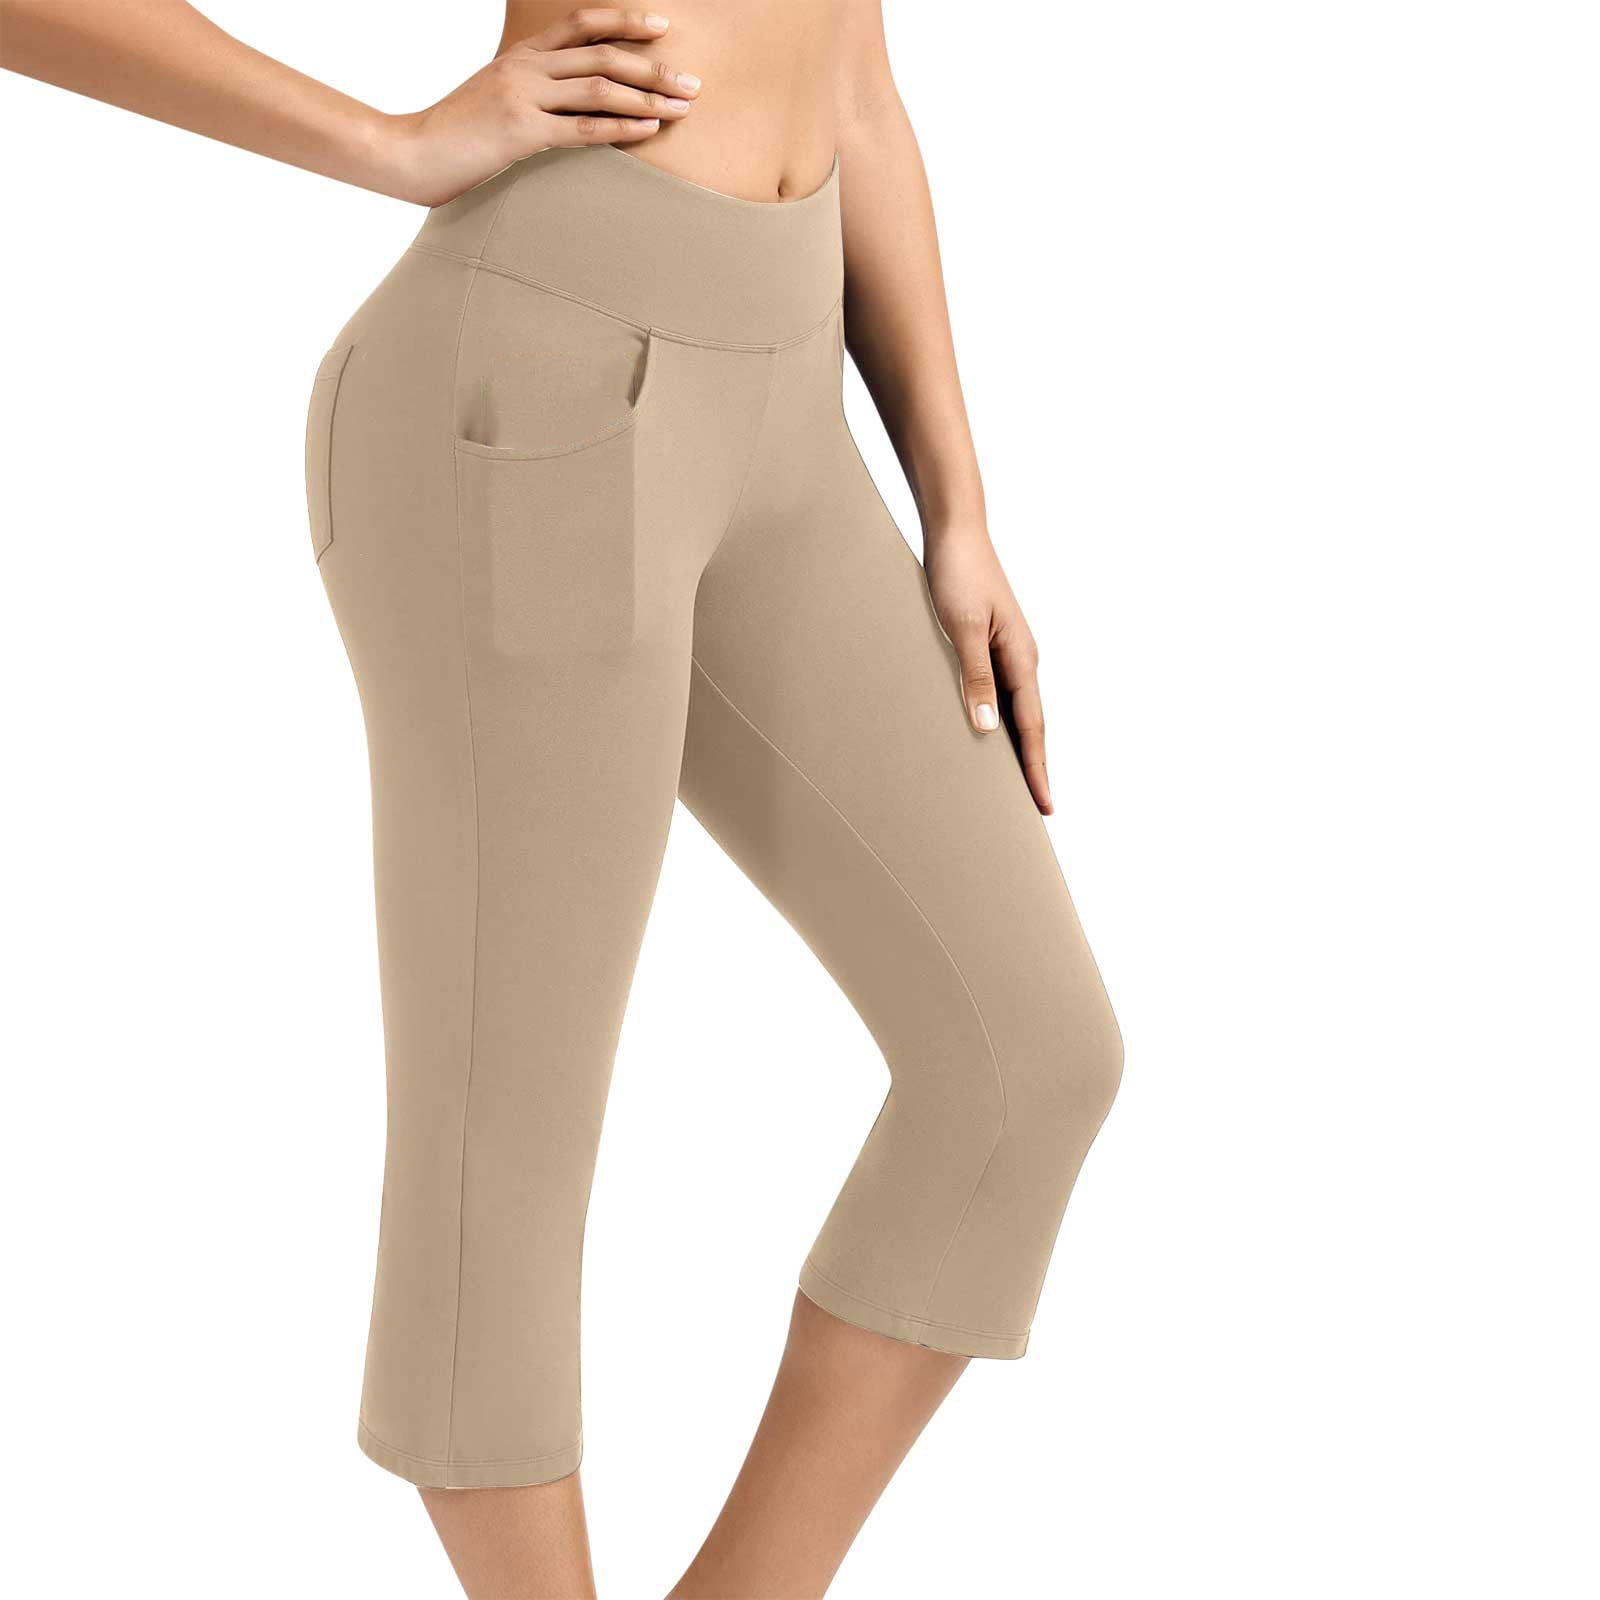 Airpow Clearance Solid Color Cropped Pants Women's Knee Length